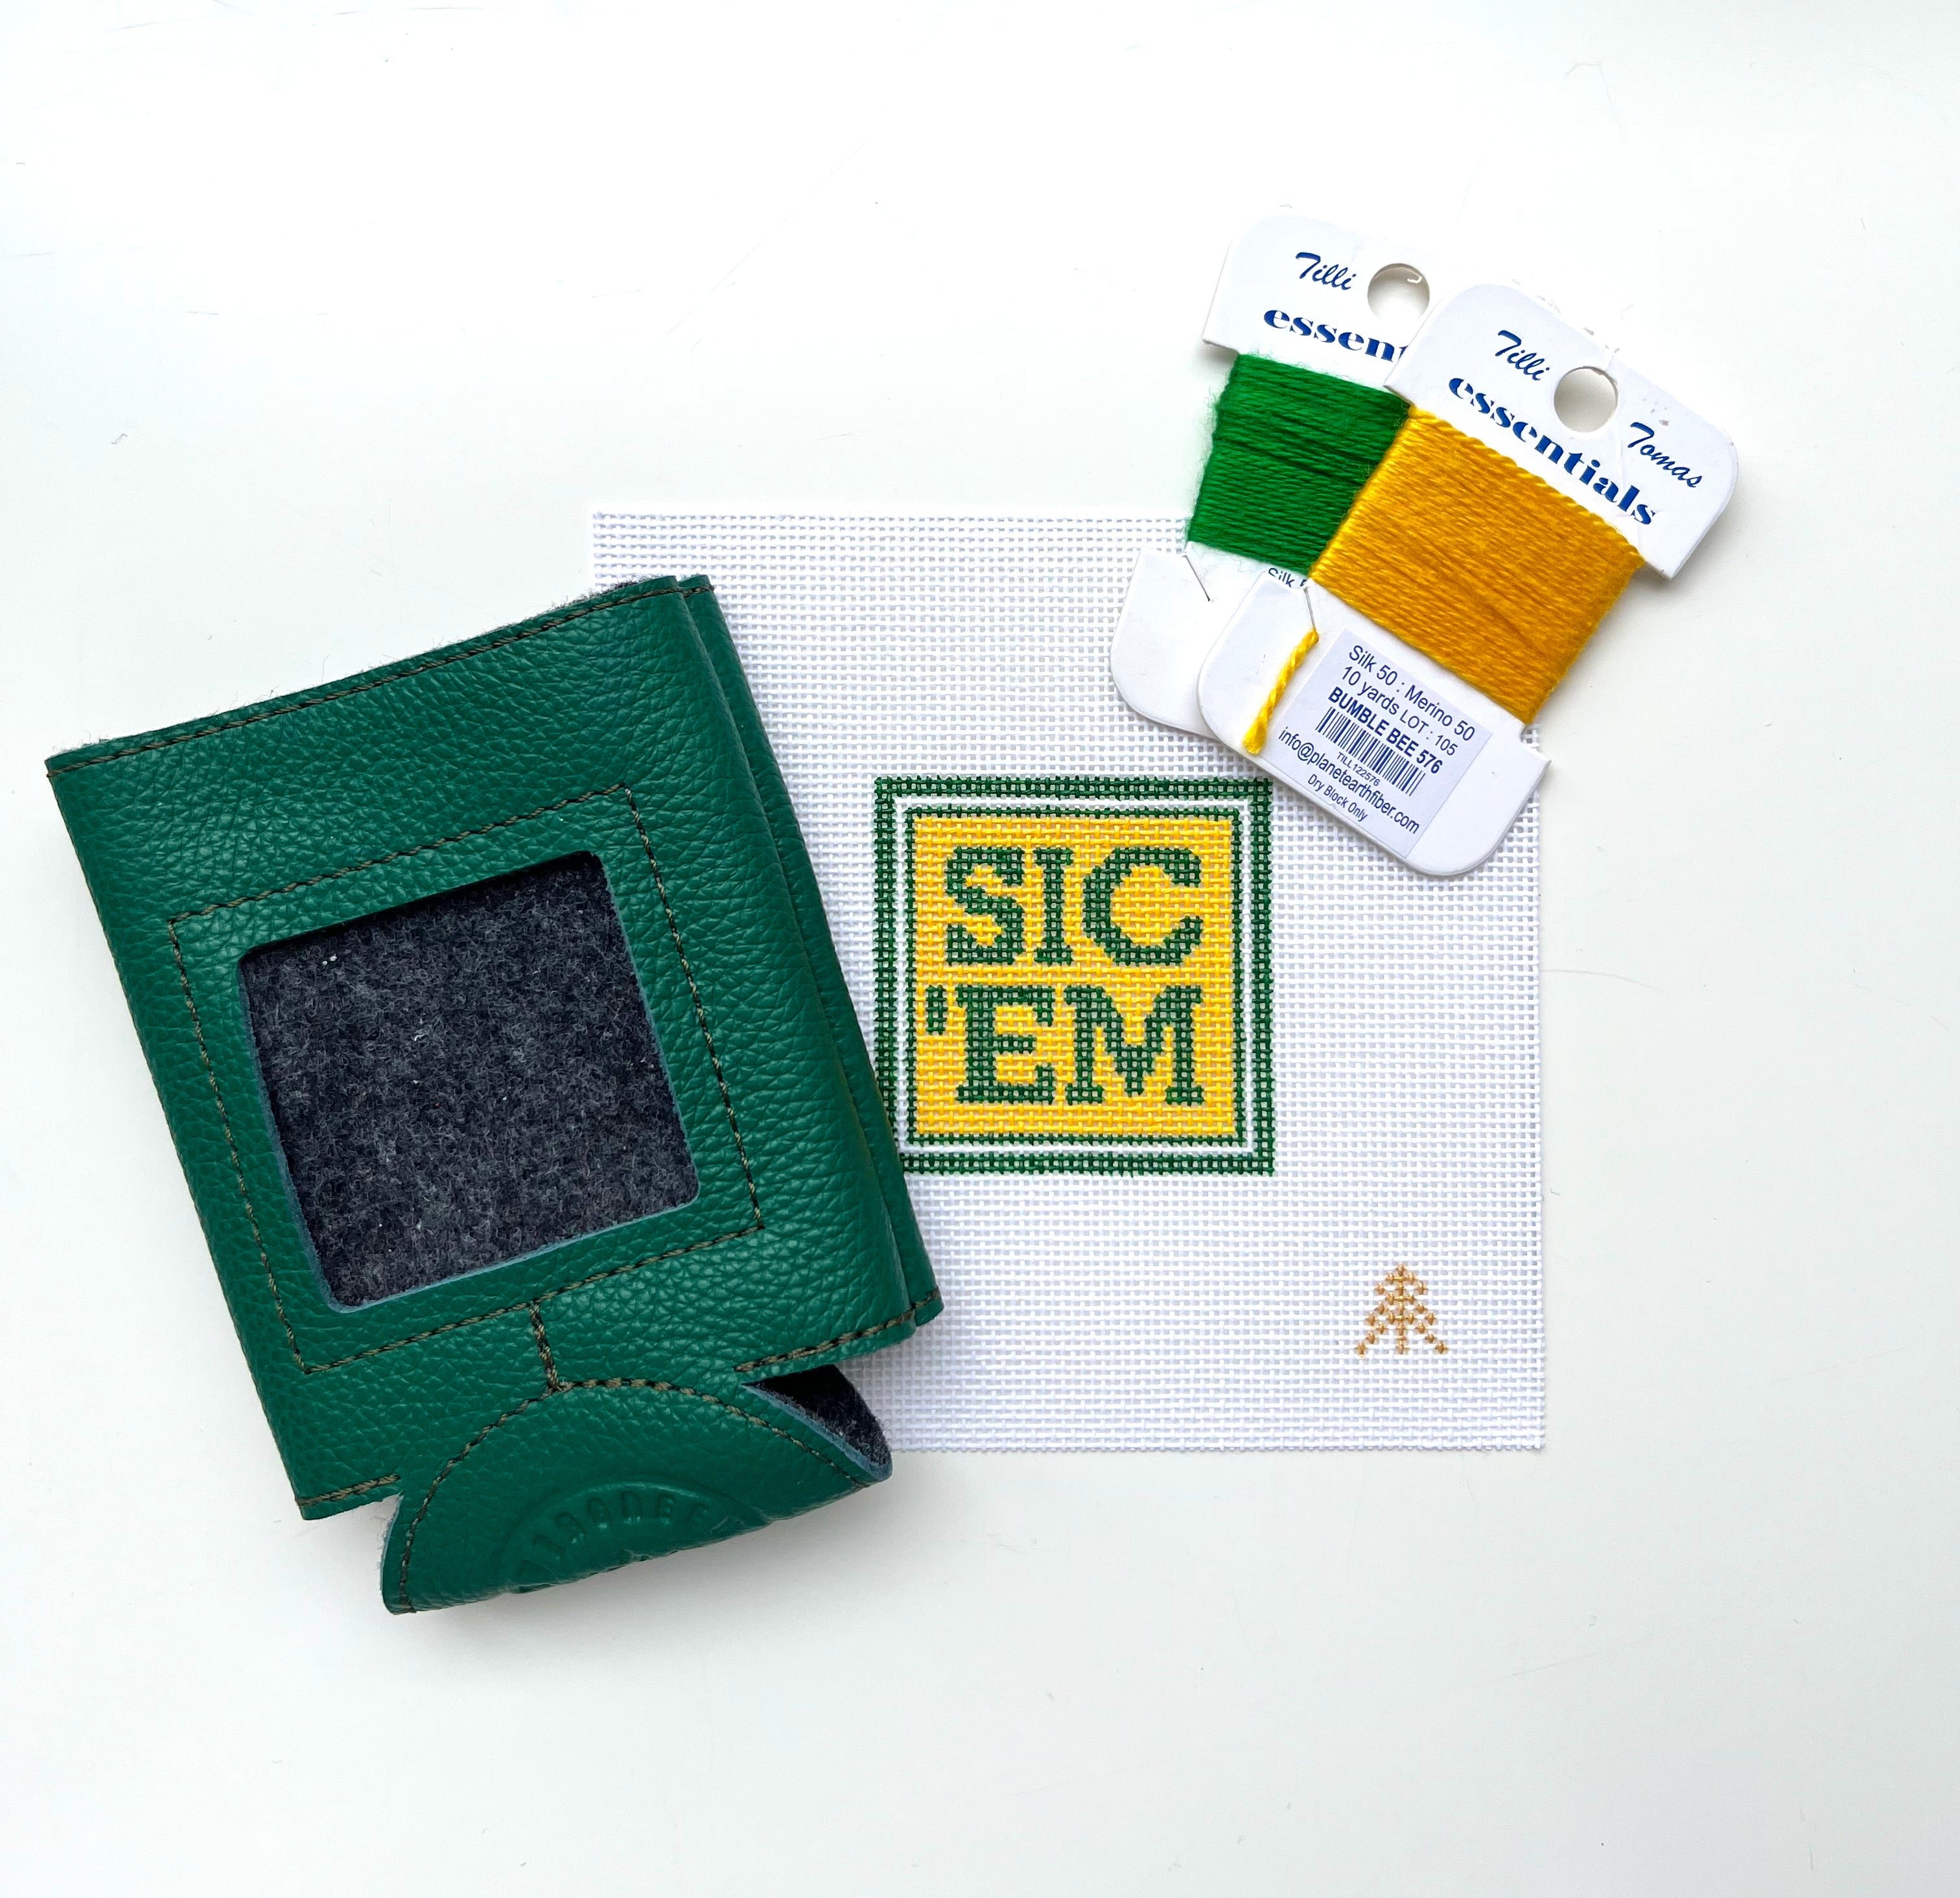 Sic 'Em Baylor Needlepoint Can Cozy Kit- Canvas Insert for Can Cozy